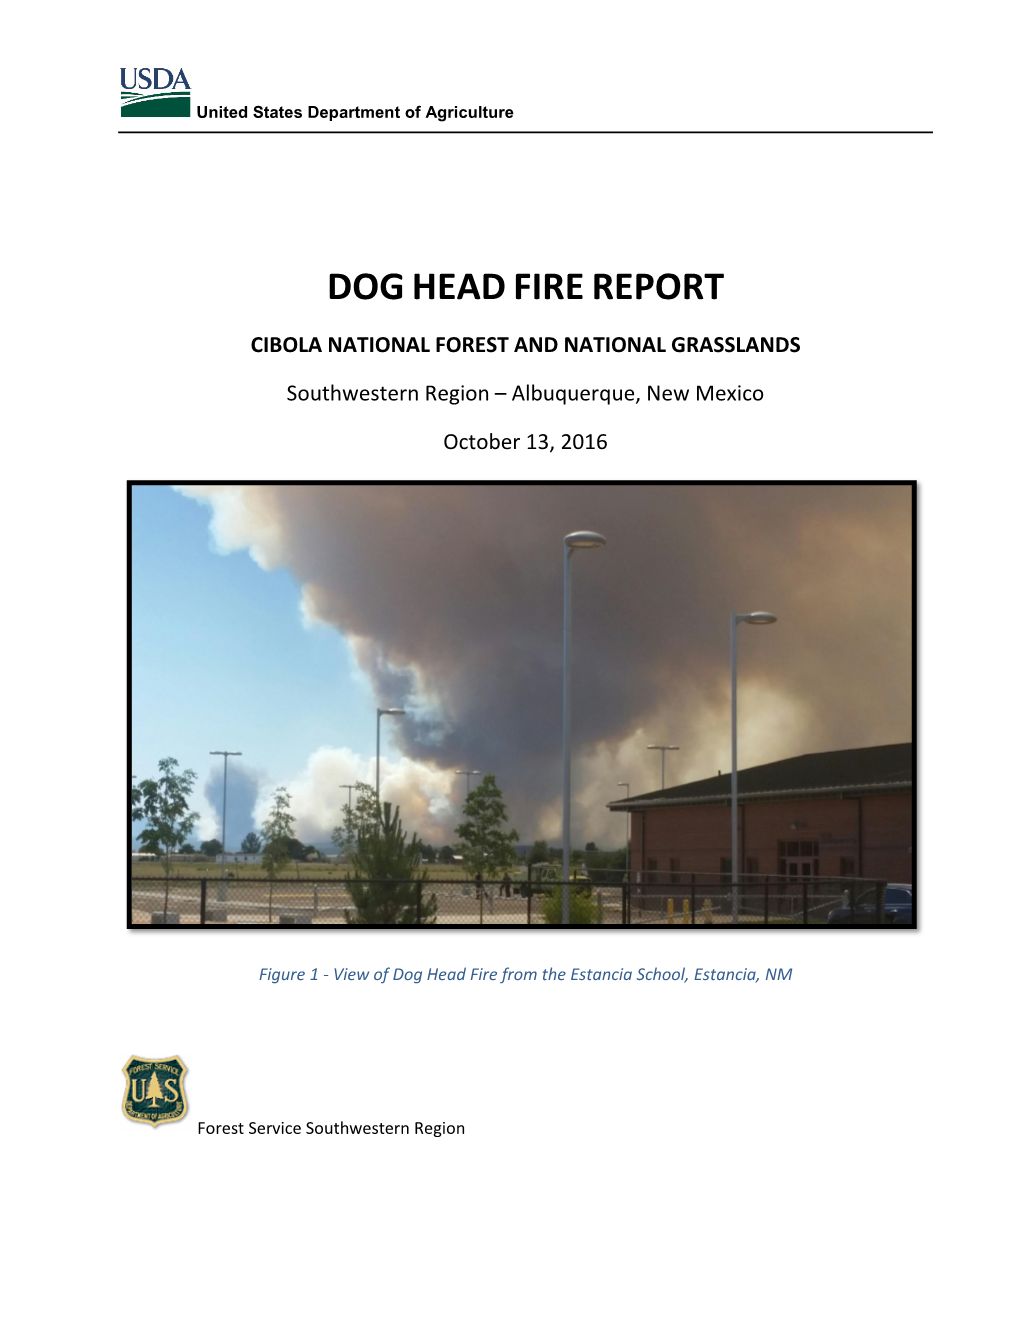 Dog Head Fire, Cibola National Forest